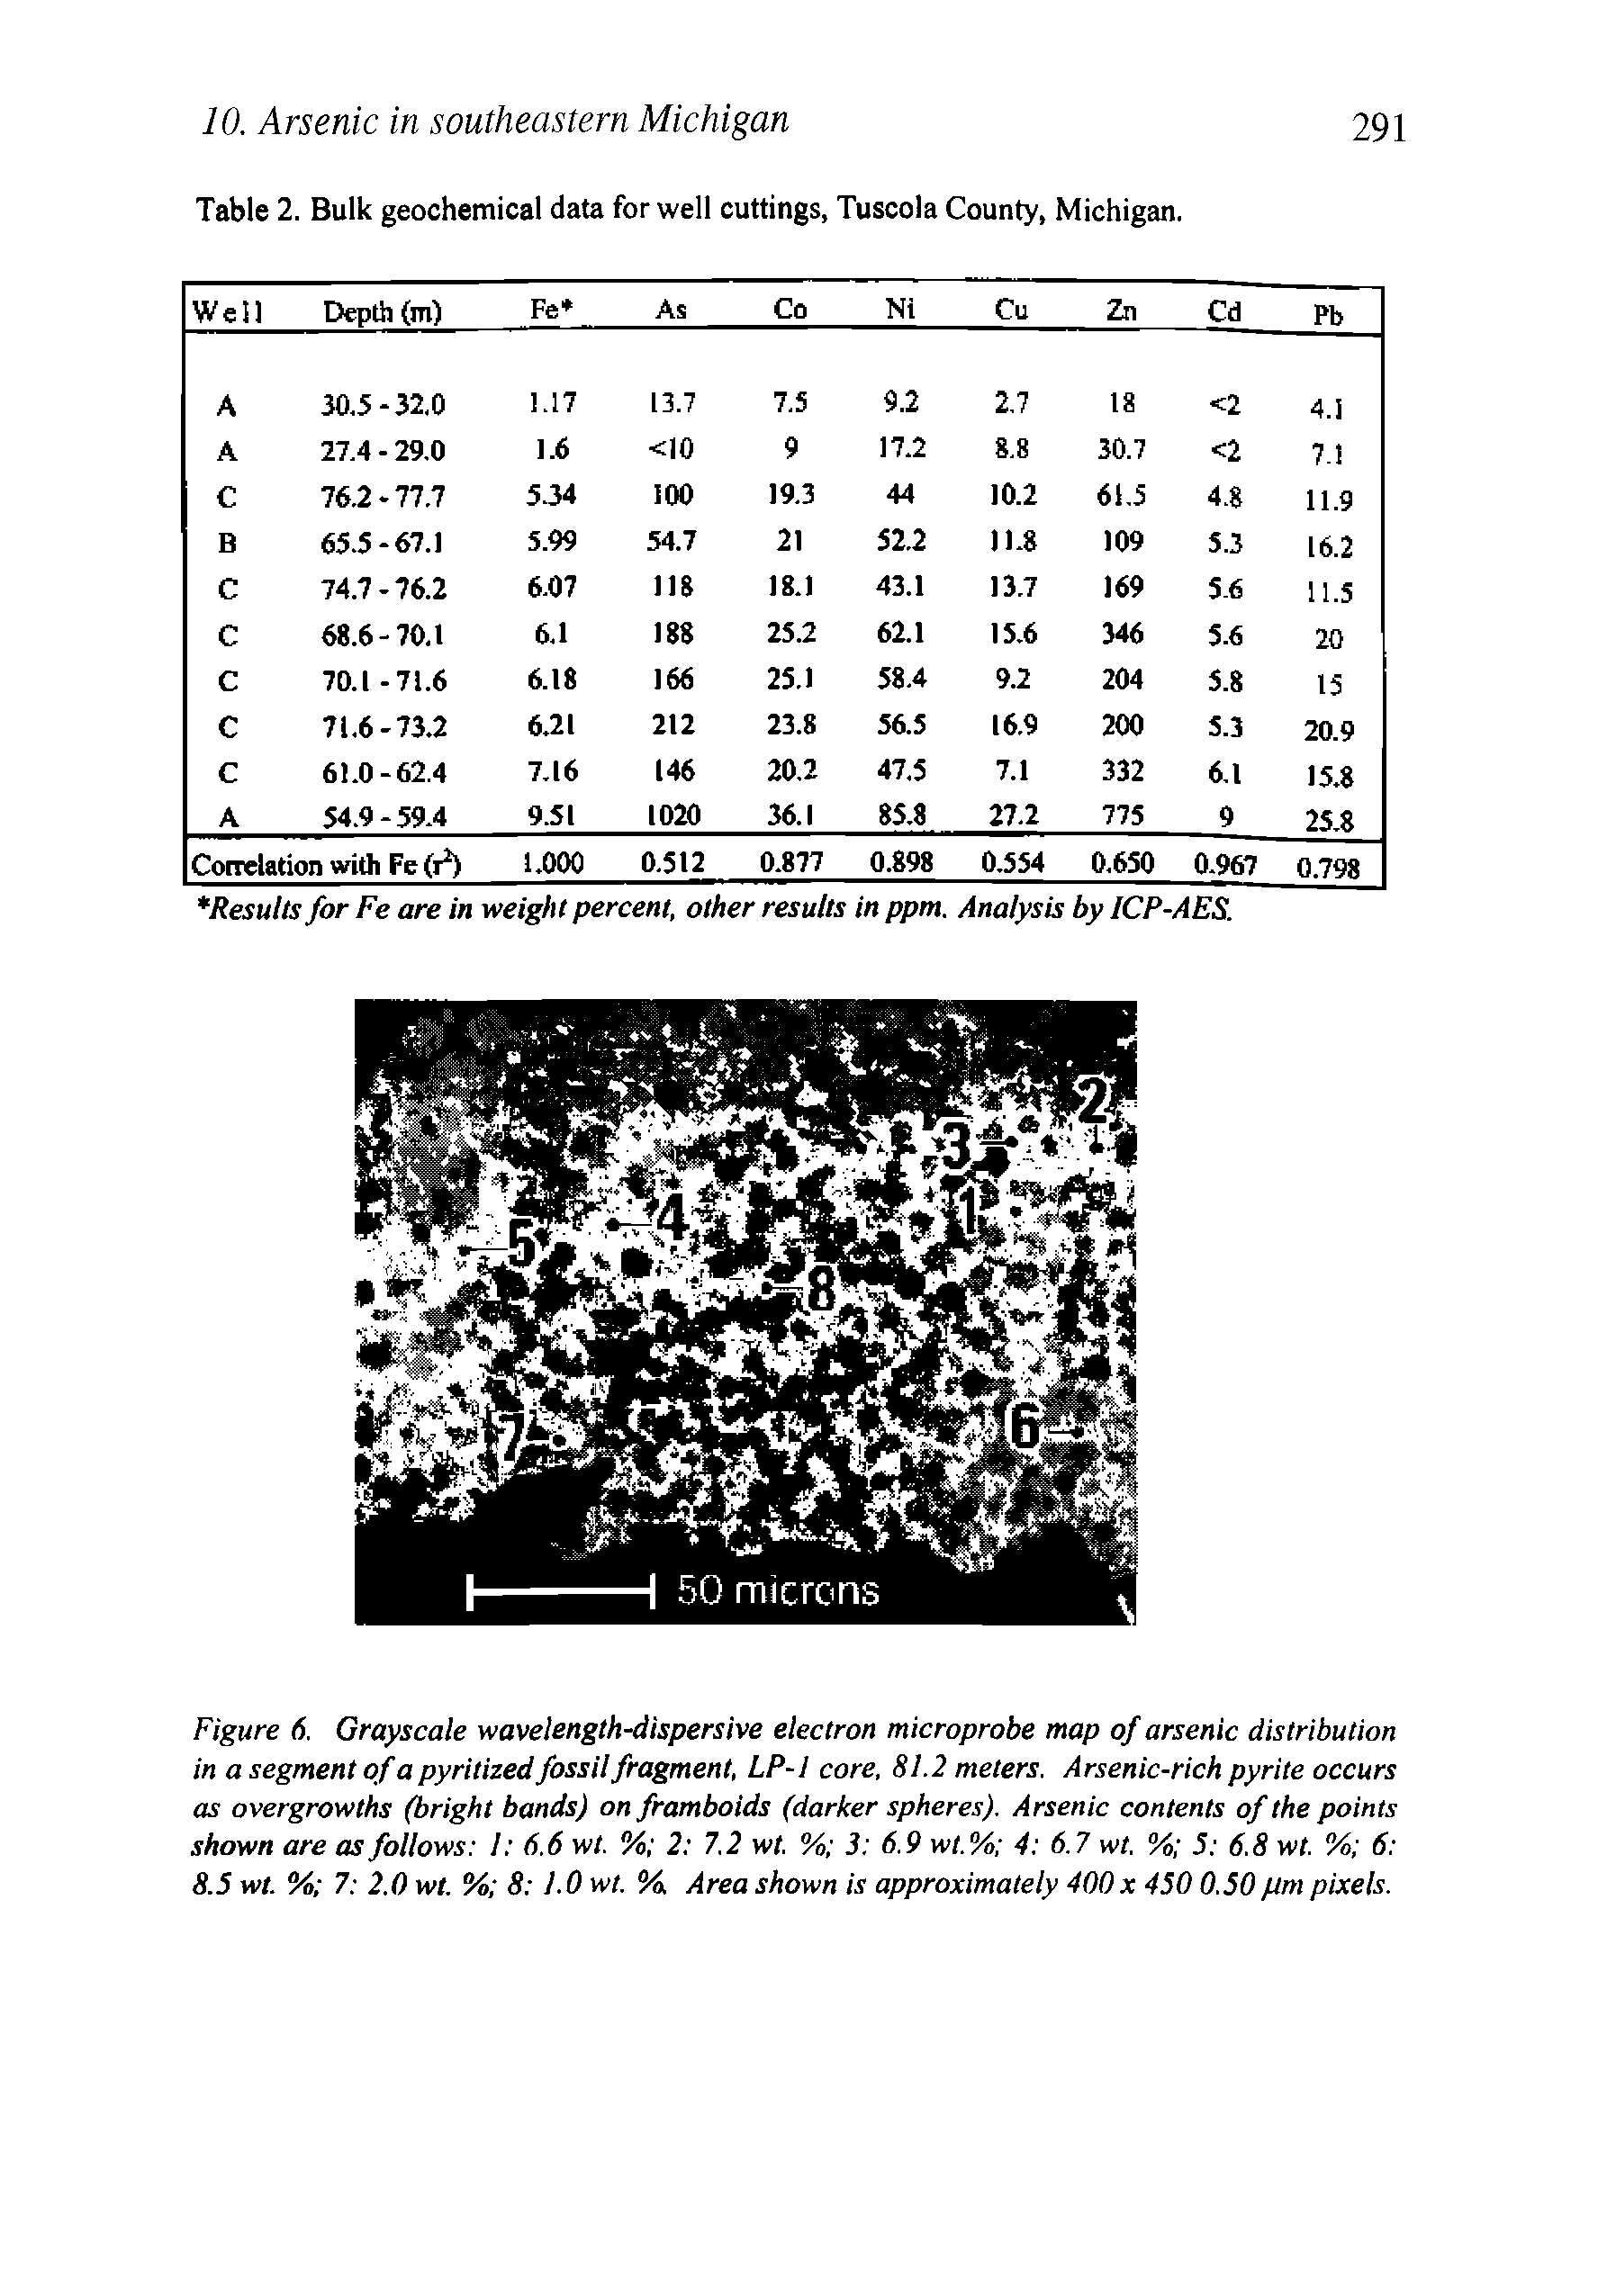 Figure 6. Grayscale wavelength-dispersive electron microprobe map of arsenic distribution in a segment of a pyritized fossil fragment, LP-l core, 81.2 meters. Arsenic-rich pyrite occurs as overgrowths (bright bands) onframboids (darker spheres). Arsenic contents of the points shown are as follows I 6.6 wt. % 2 7.2 wt. % 3 6.9 wt.% 4 6.7 wt. % 5 6.8 wt. % 6 8.5 wt. % 7 2.0 wt. % 8 1.0 wt. %. Area shown is approximately 400 x 450 0.50 pm pixels.